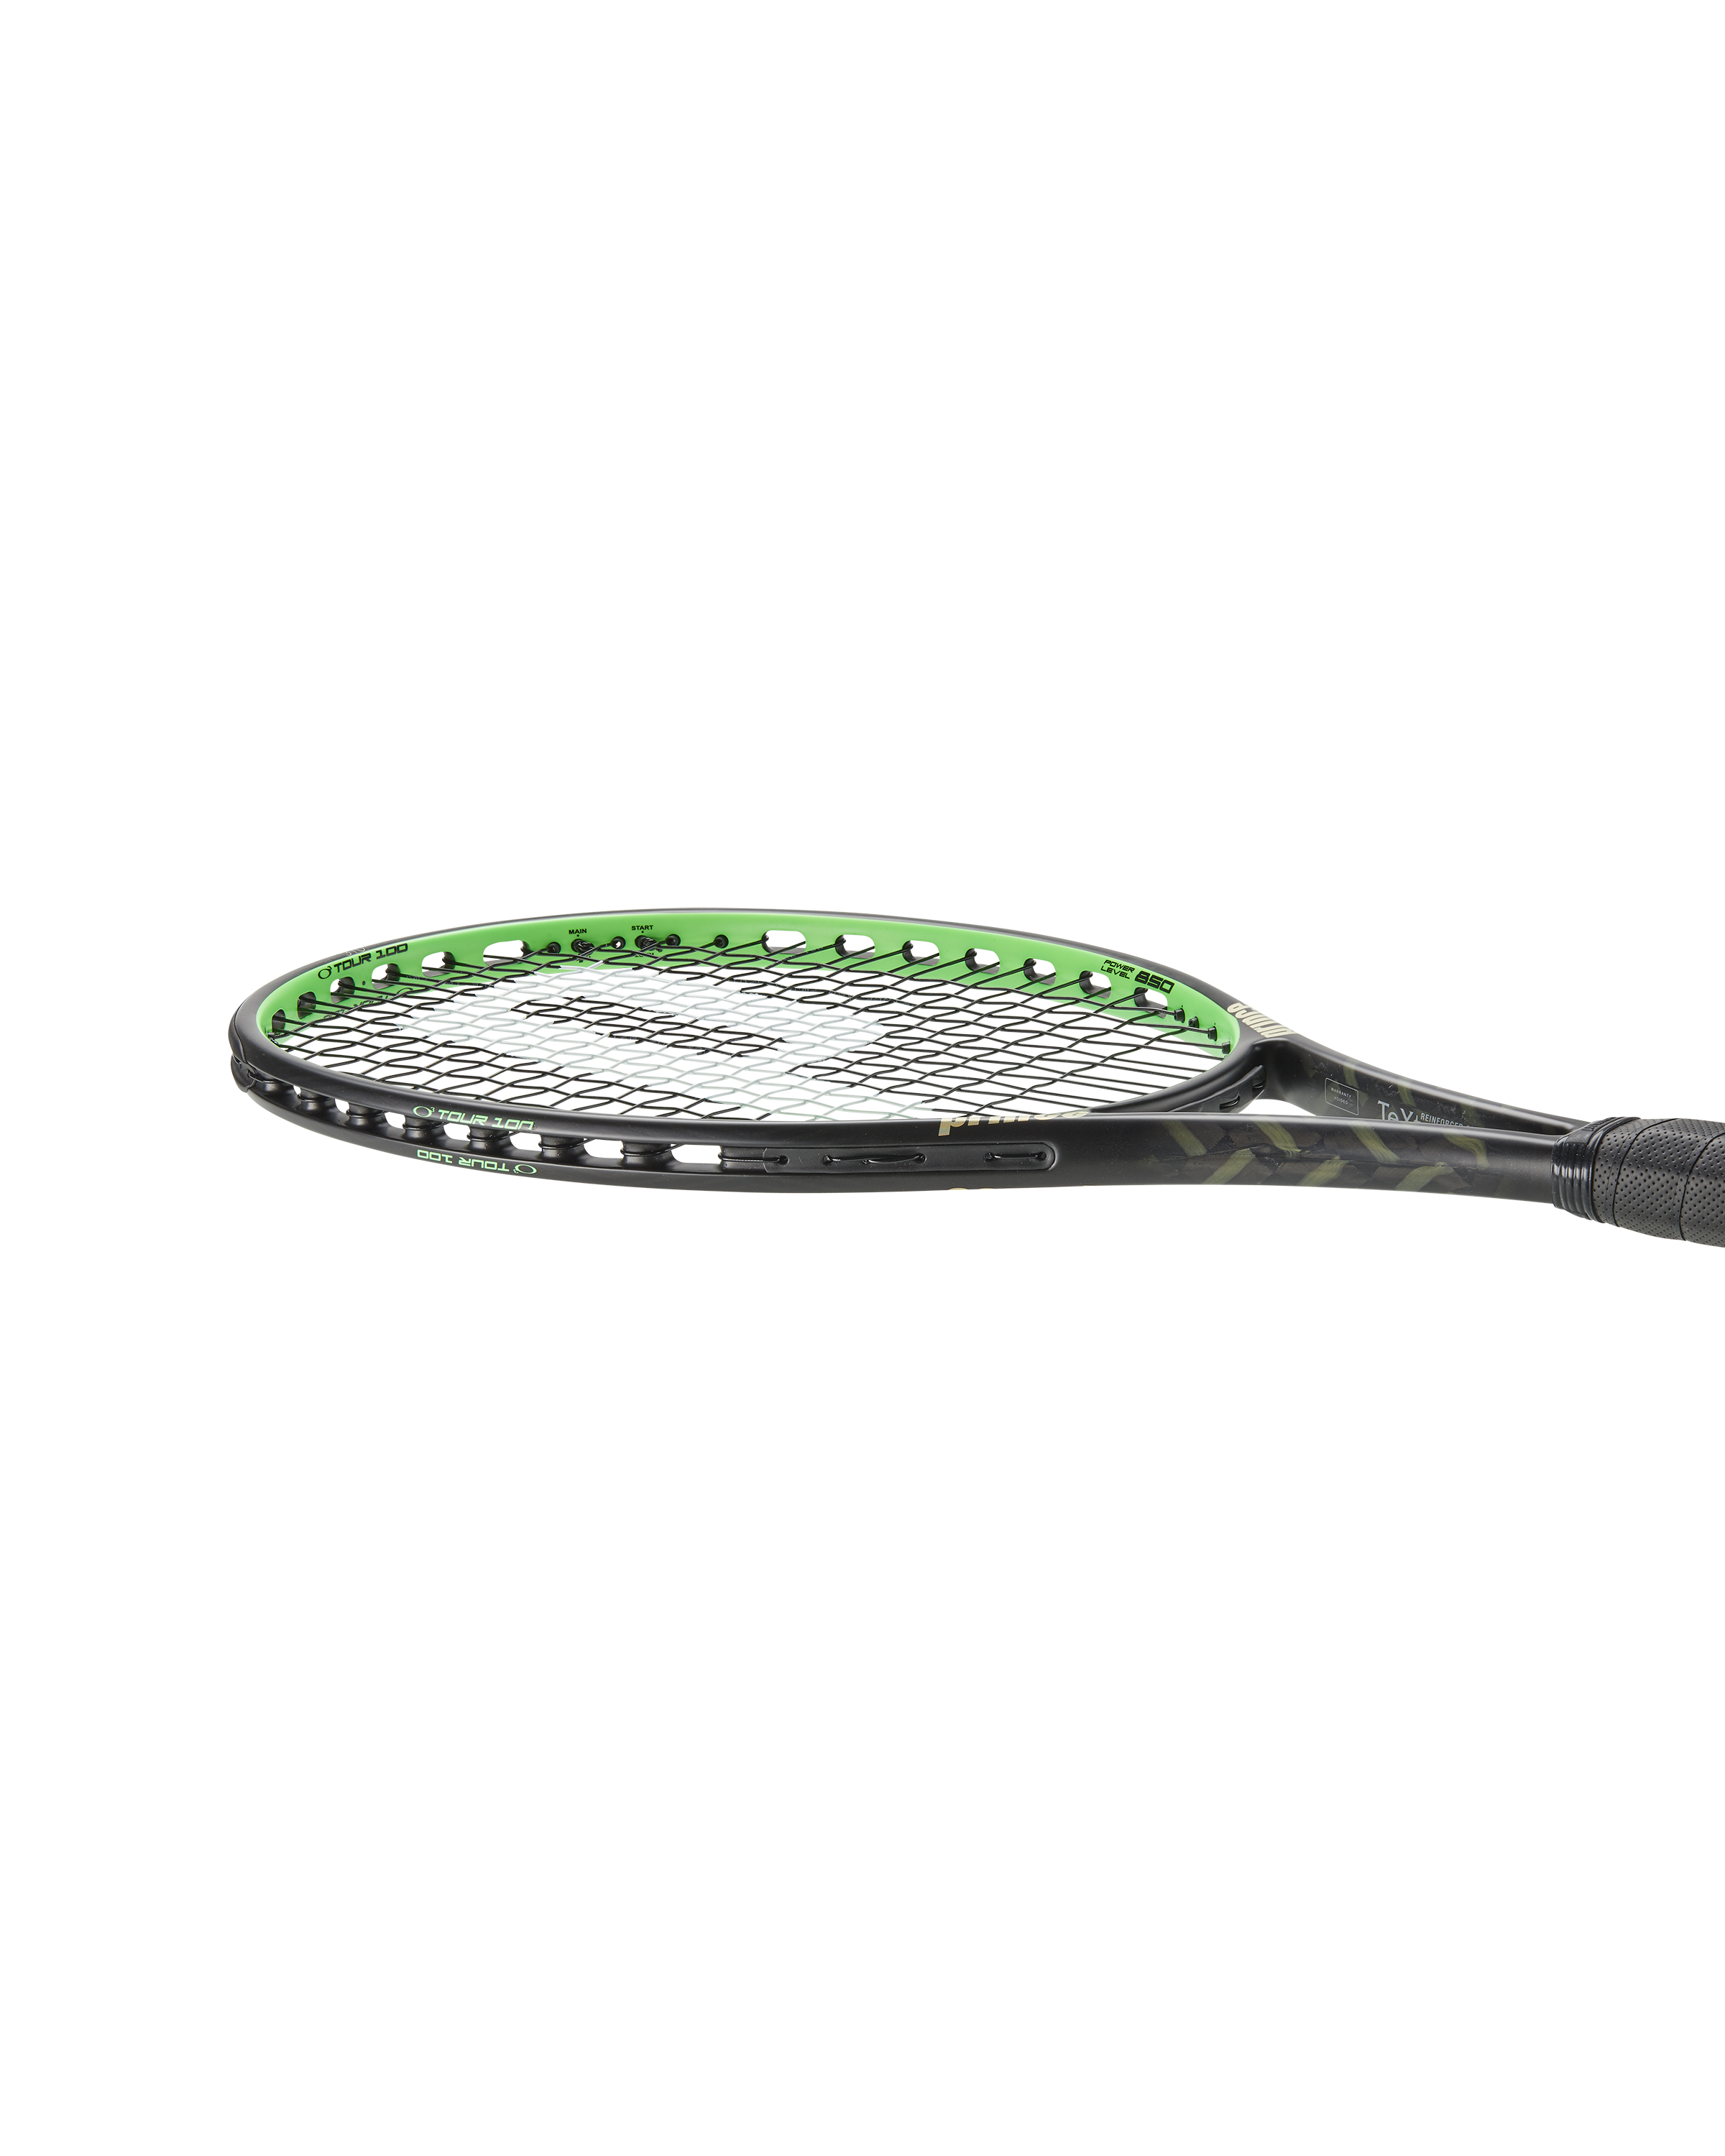 prince textreme o3 tour 100 (310) rackets review